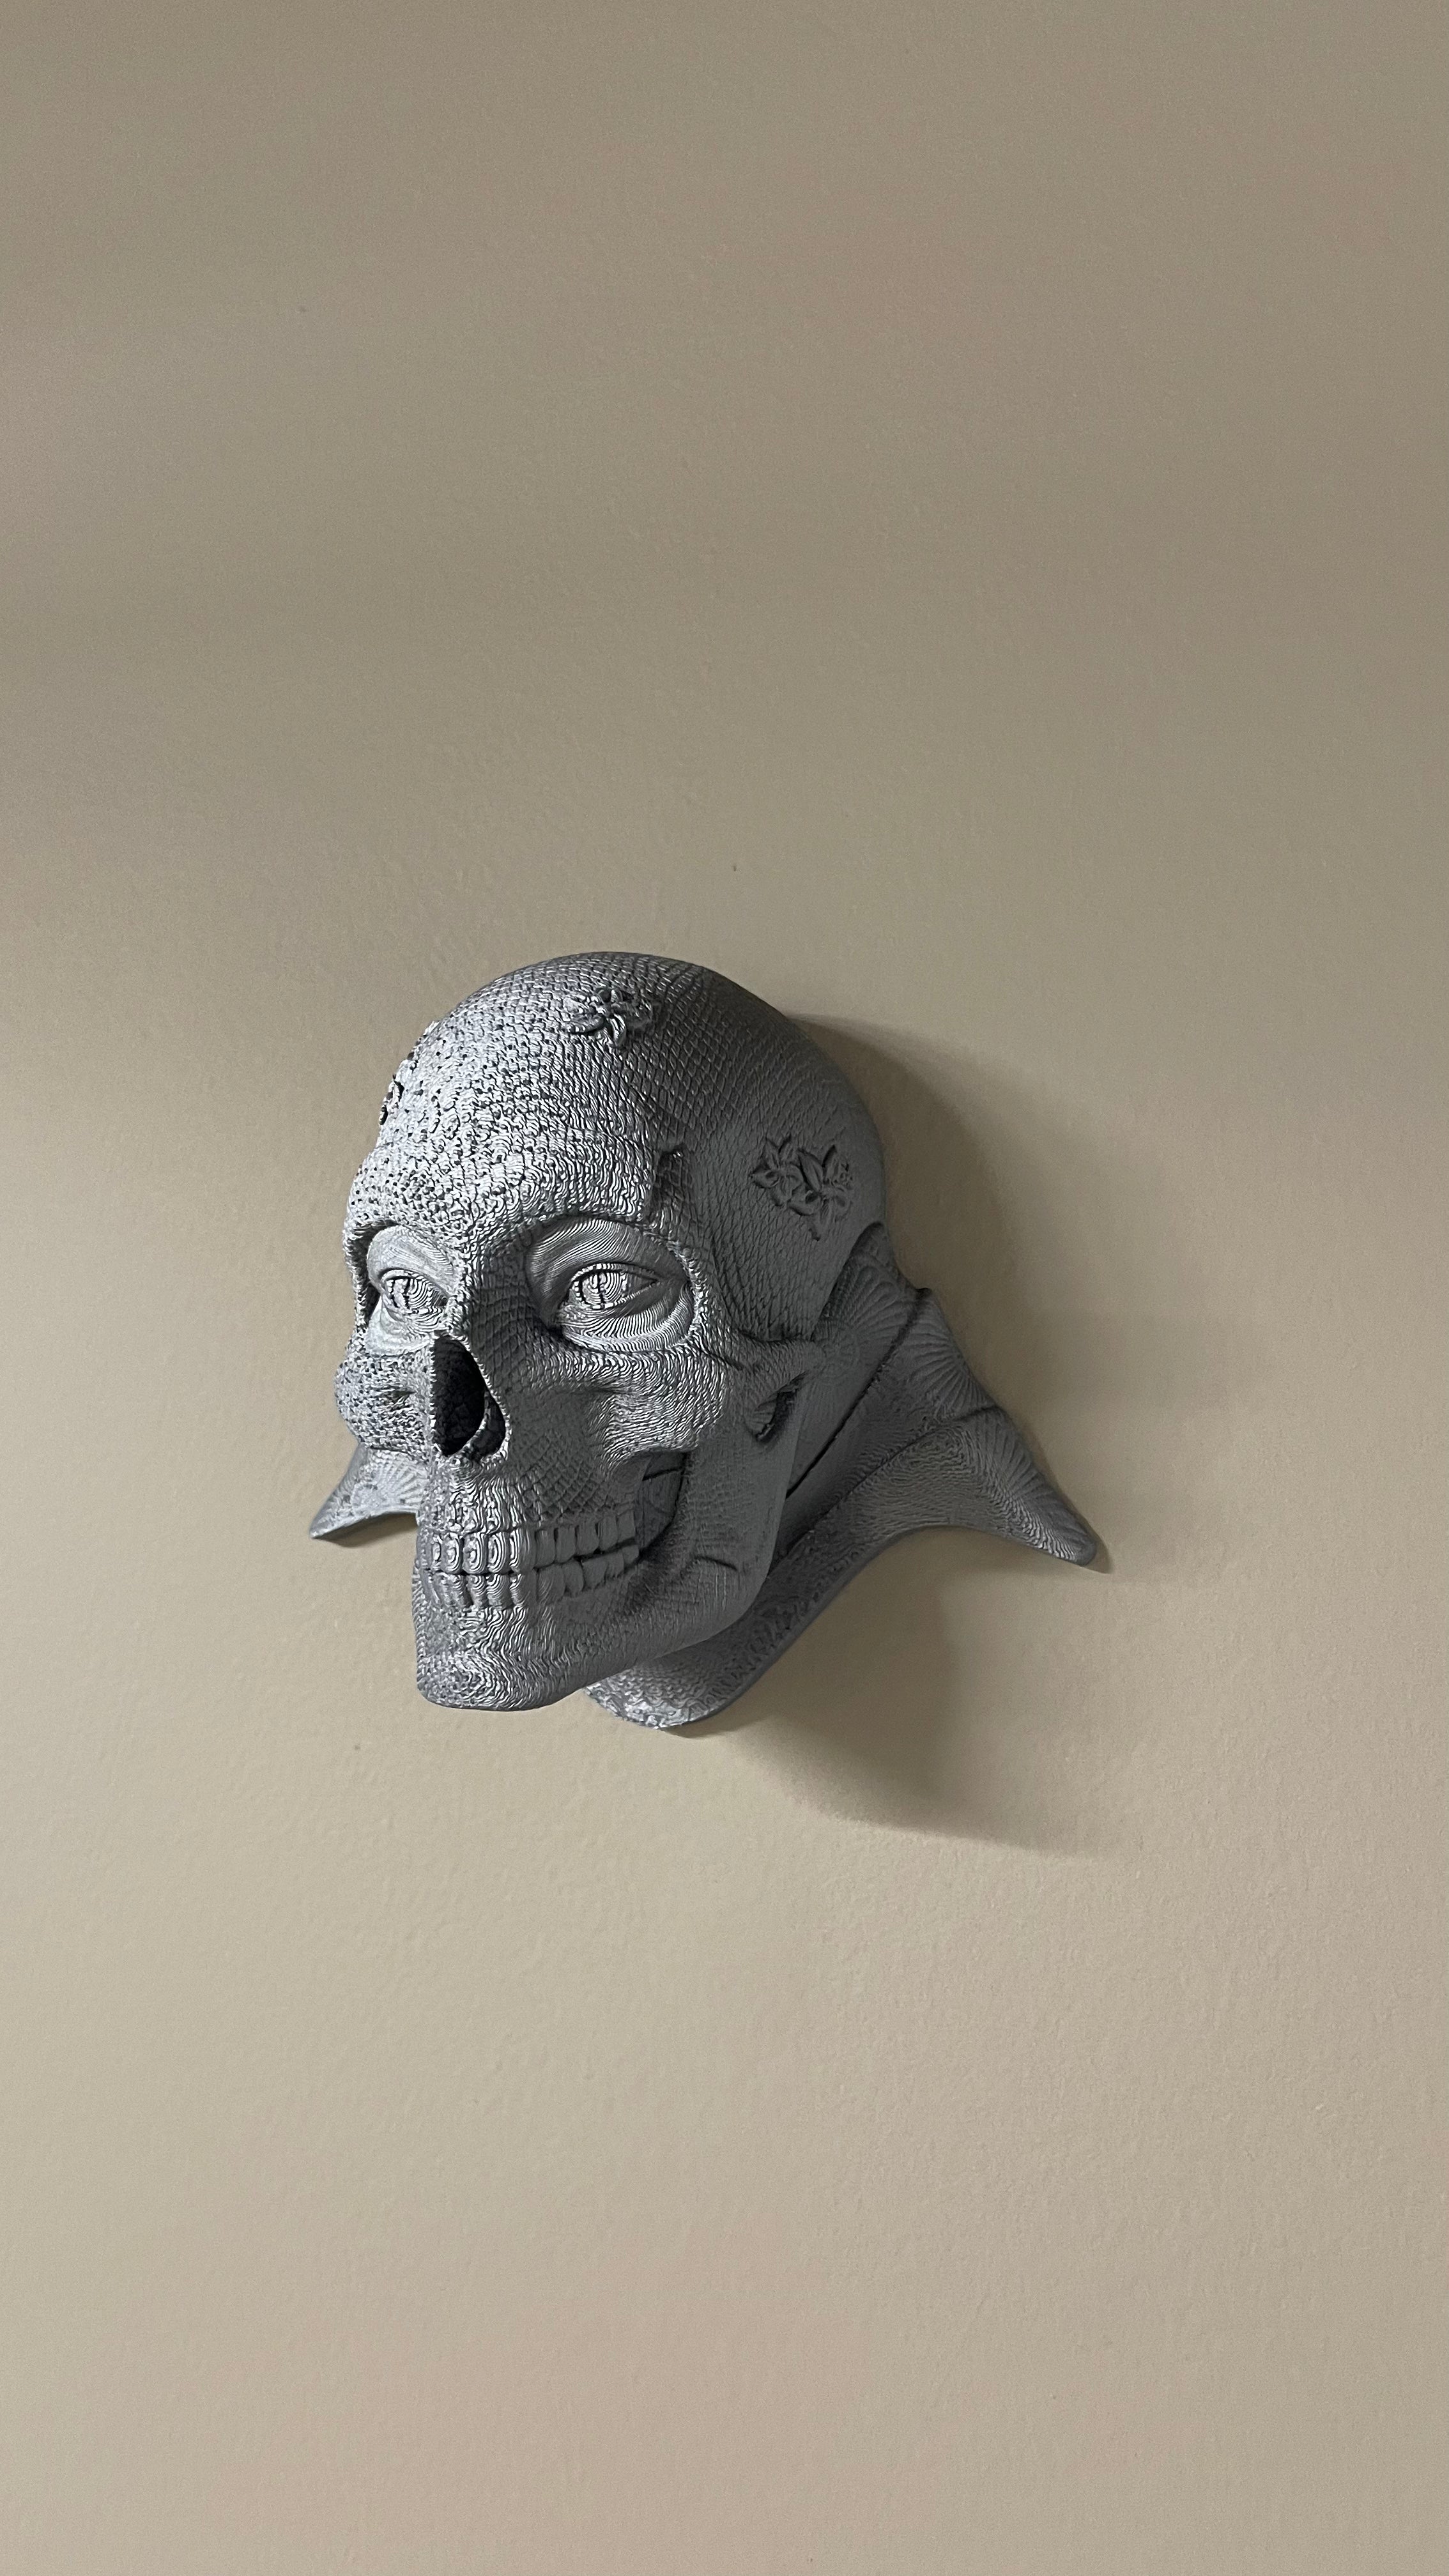 Unveil the Spirit of the Orochi Samurai with Our Skull Wall Art Honor and Strength